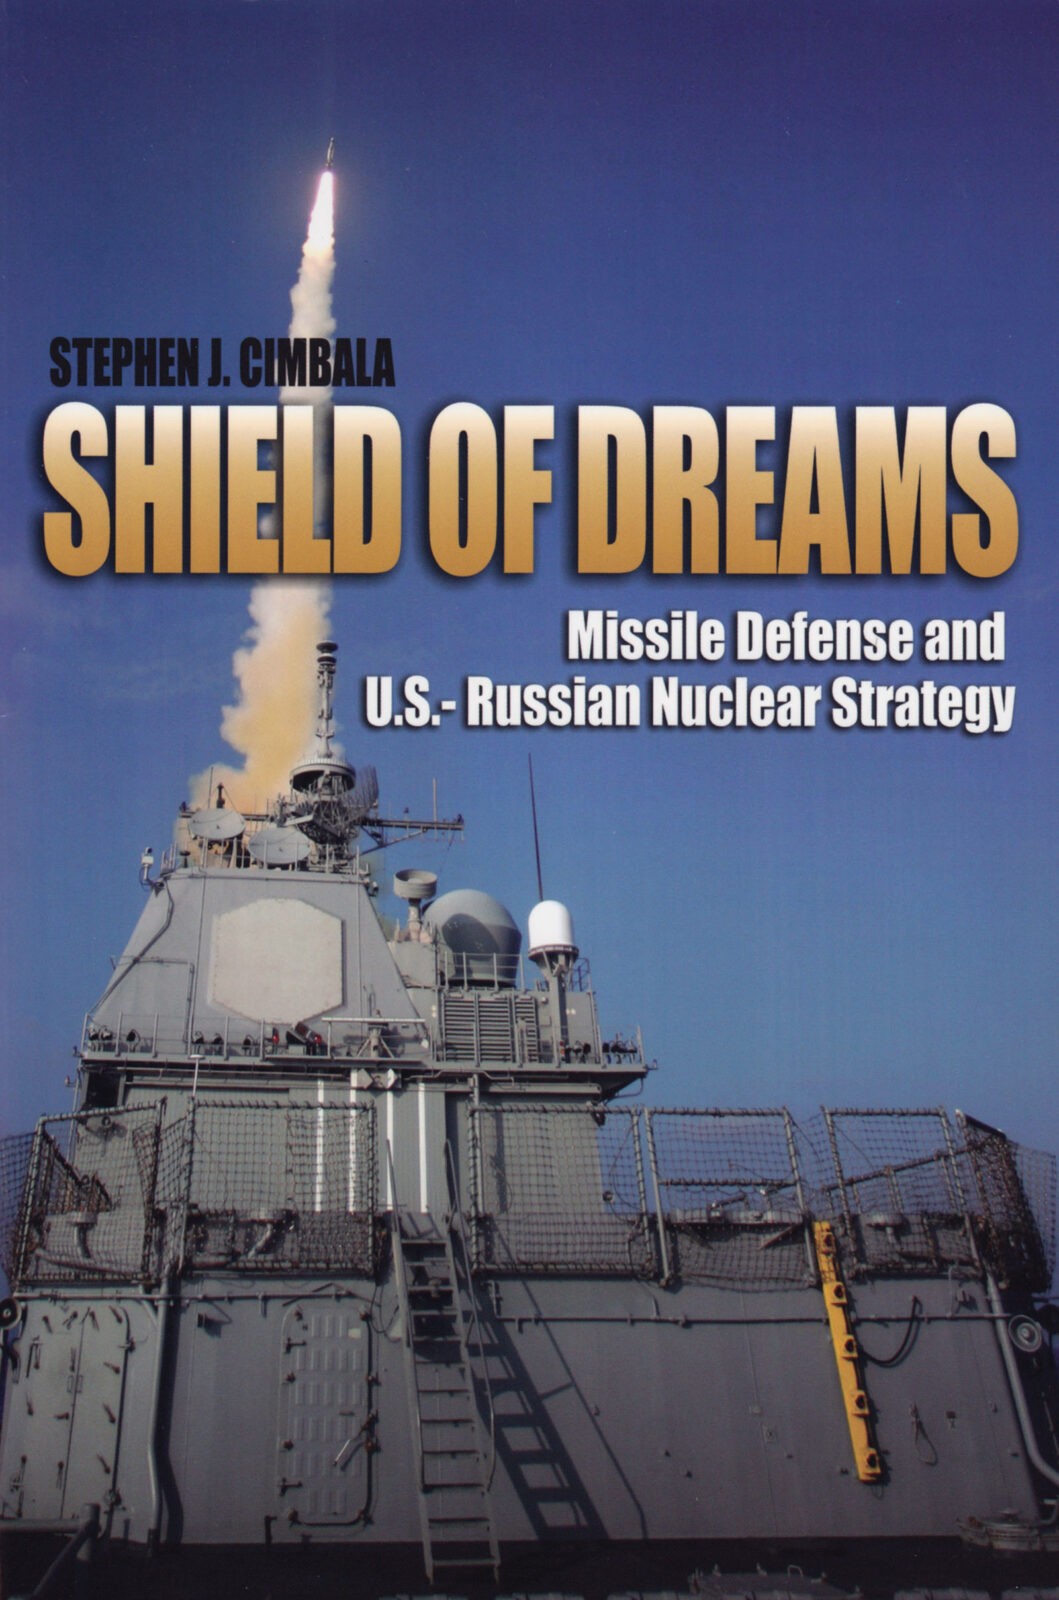 Missile Defenses in U.S and Russian Nuclear Strategy Shield of Dreams